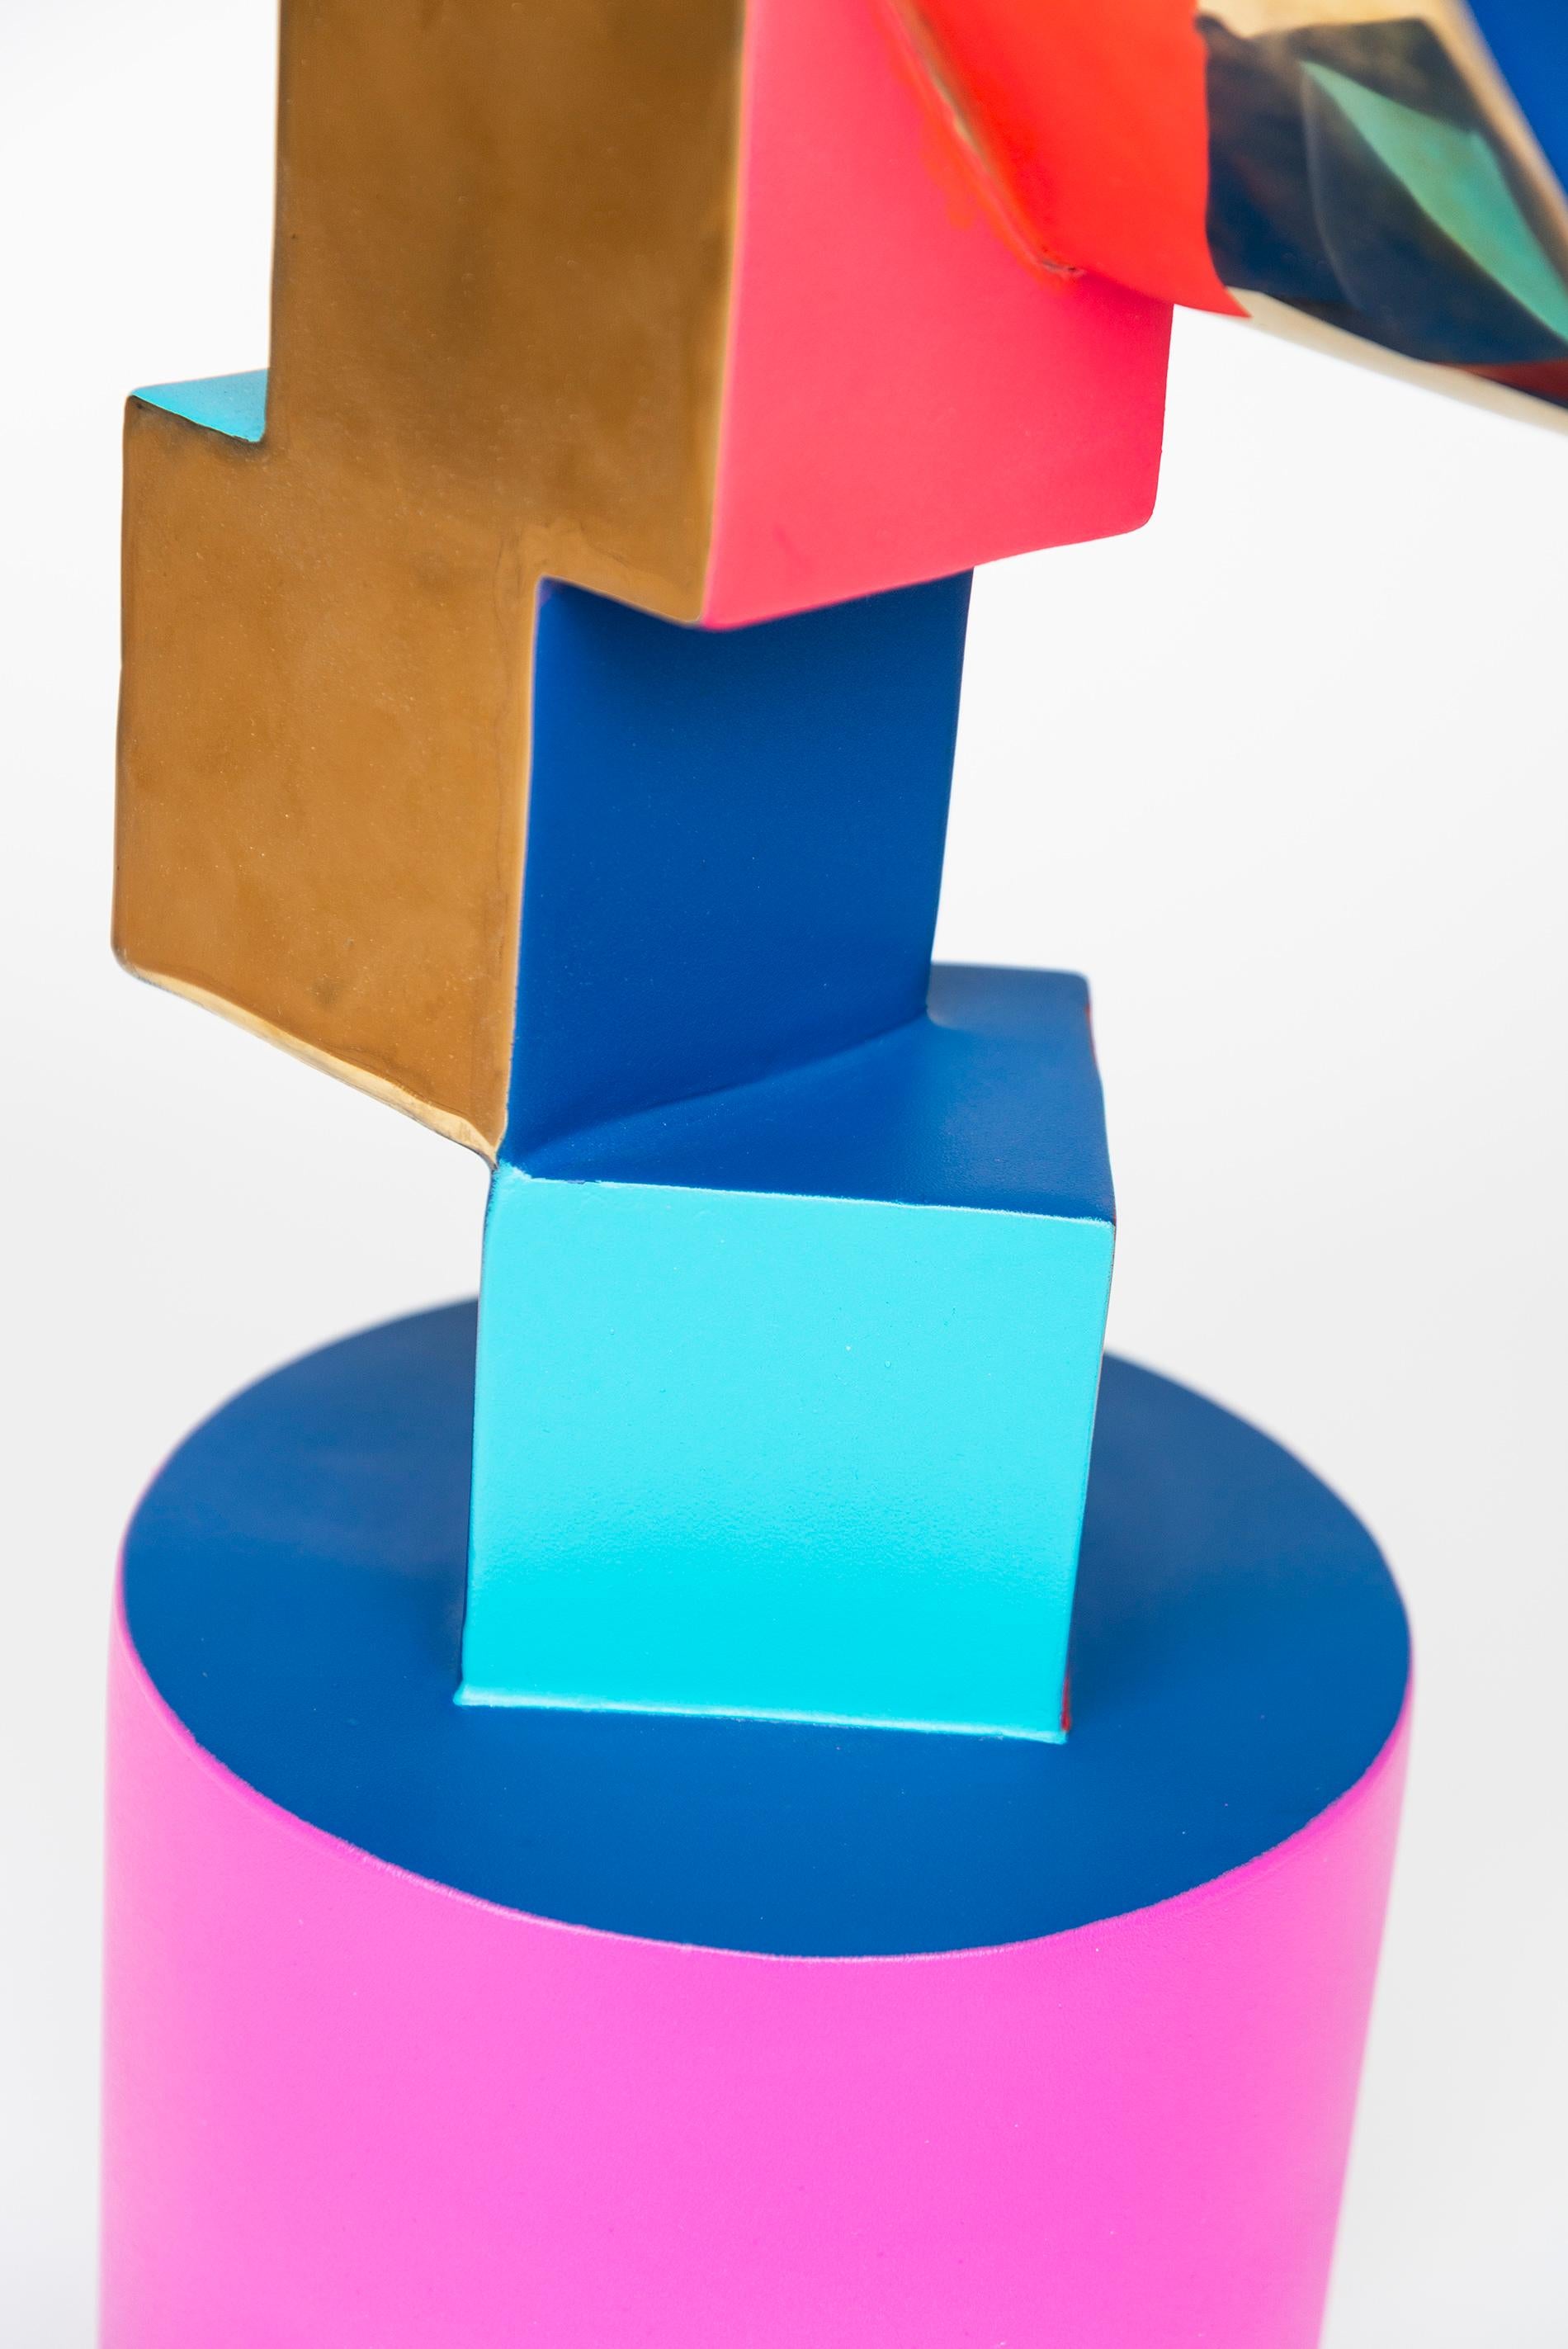 Swift - bright, colourful, abstract, pop art, painted stainless steel sculpture For Sale 3